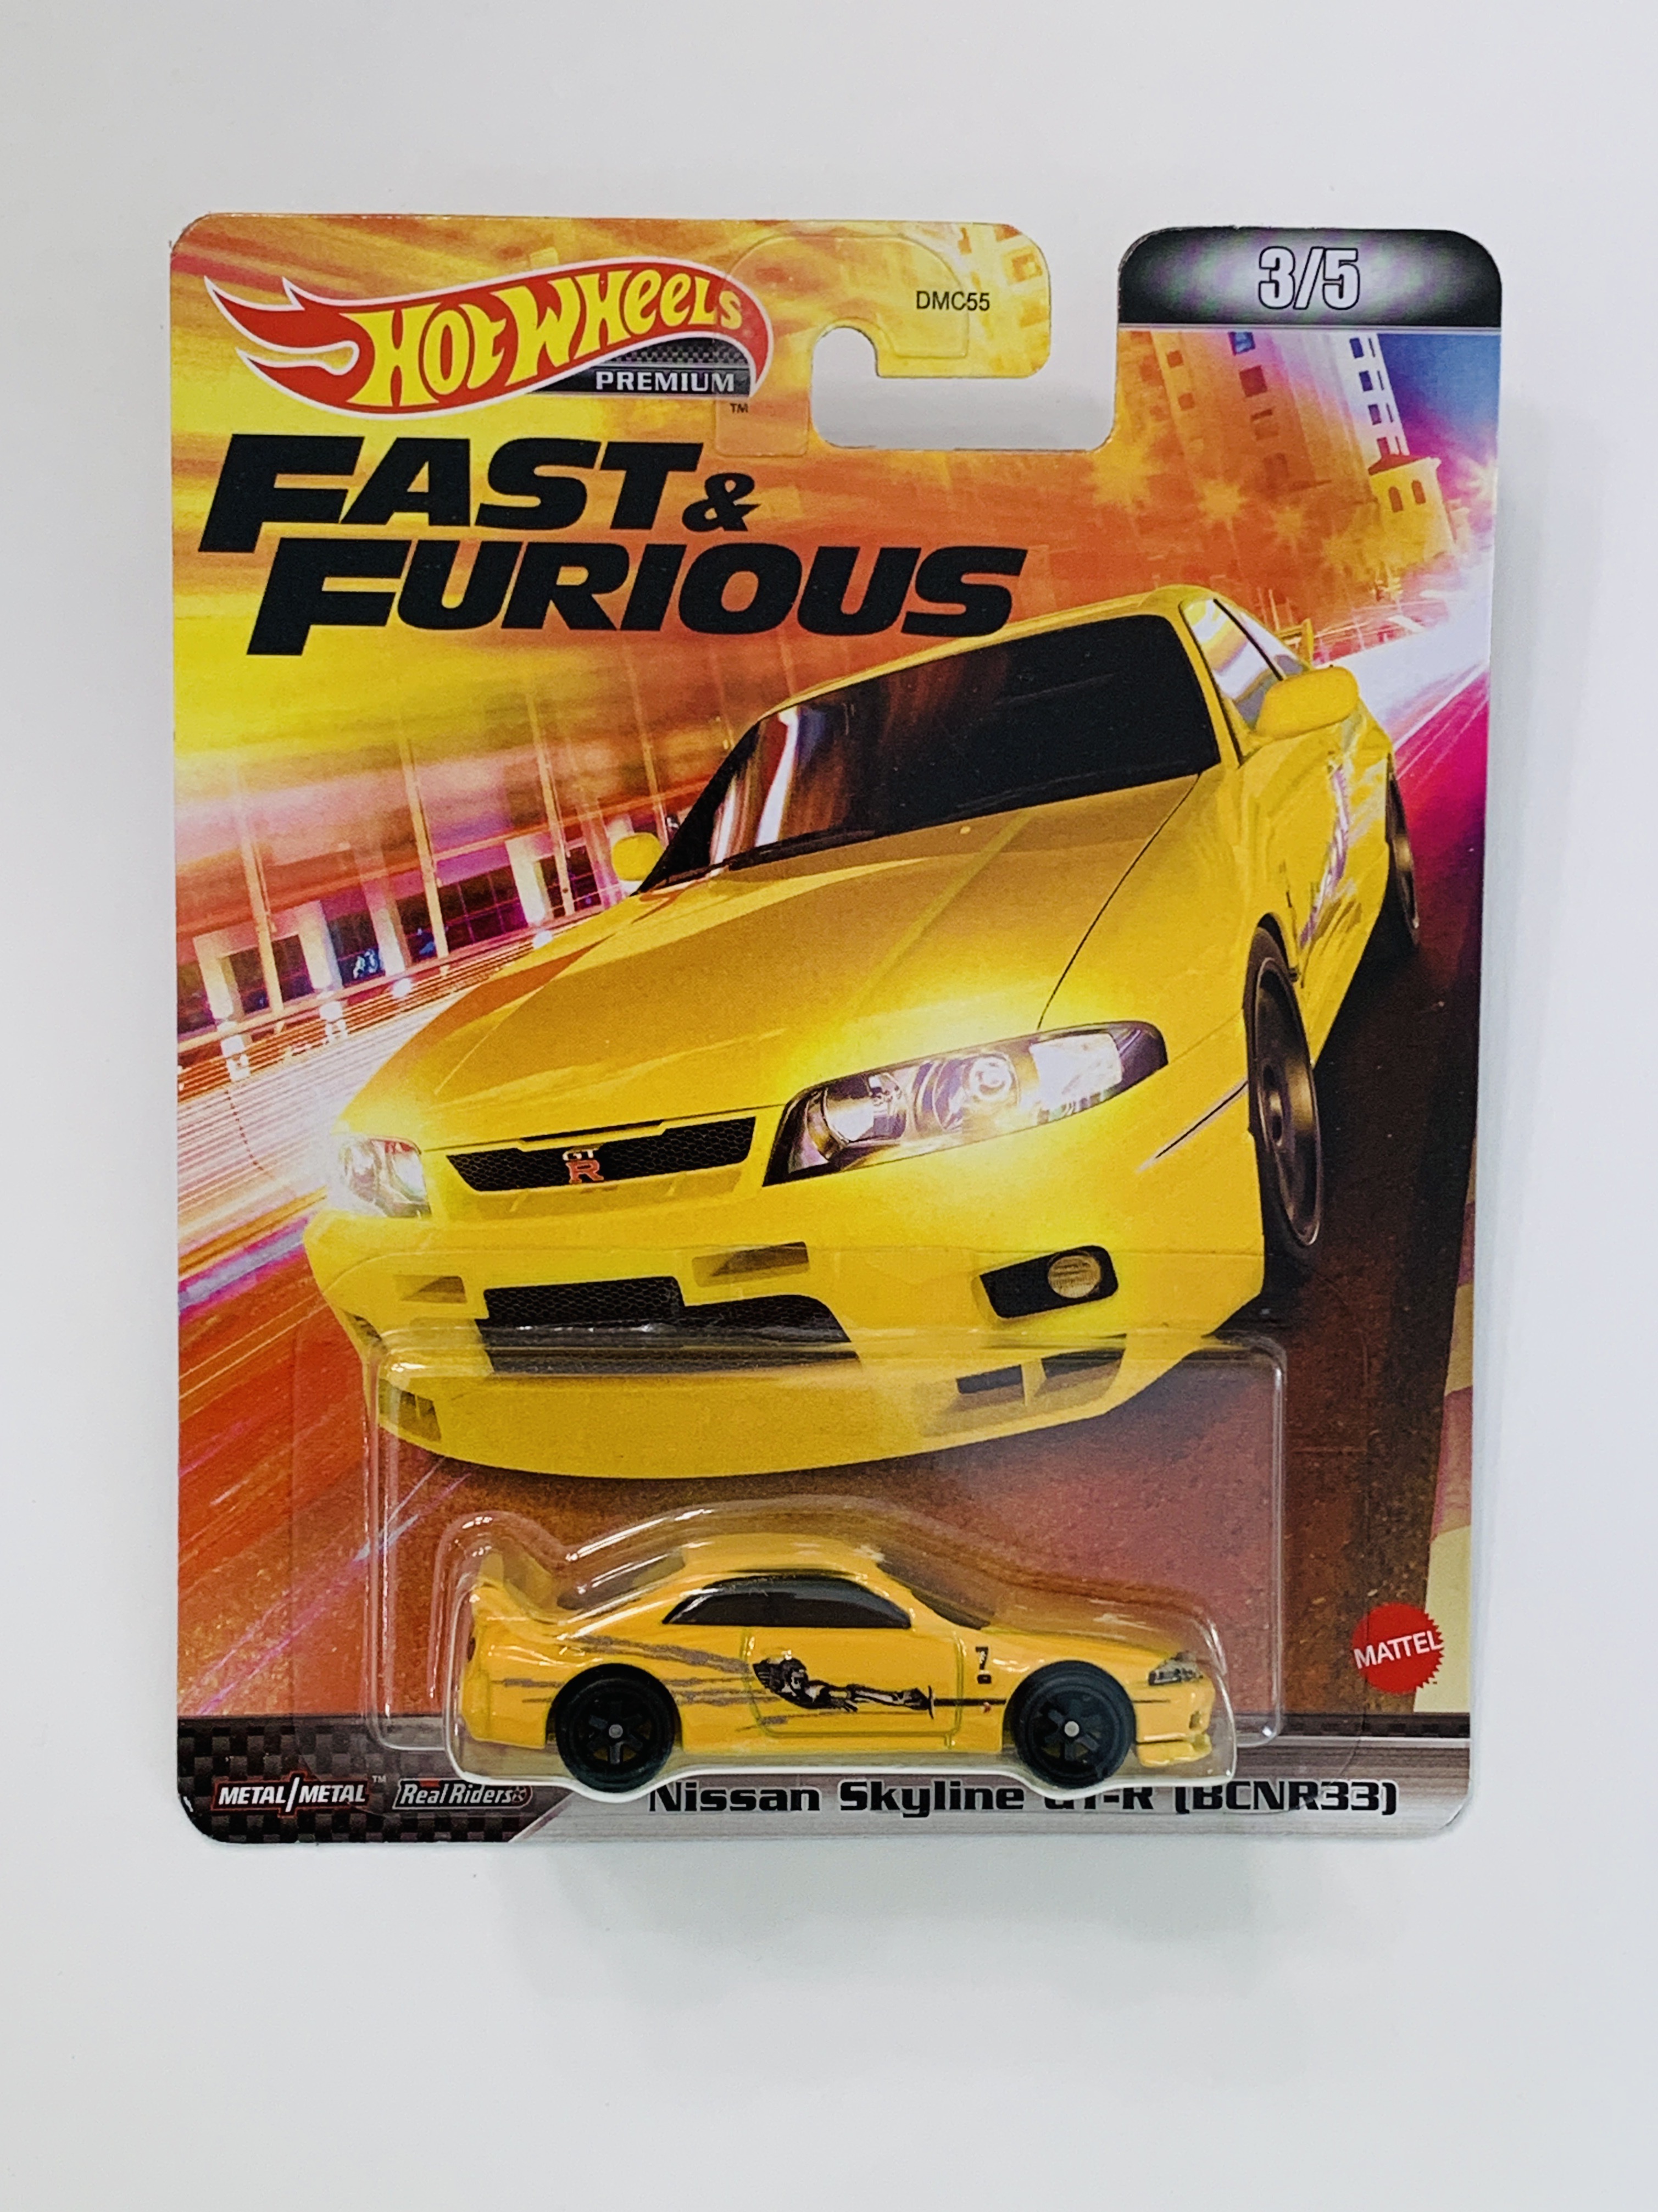 Hot Wheels Premium The Fast And The Furious Nissan Skyline GT-R (BCNR33)